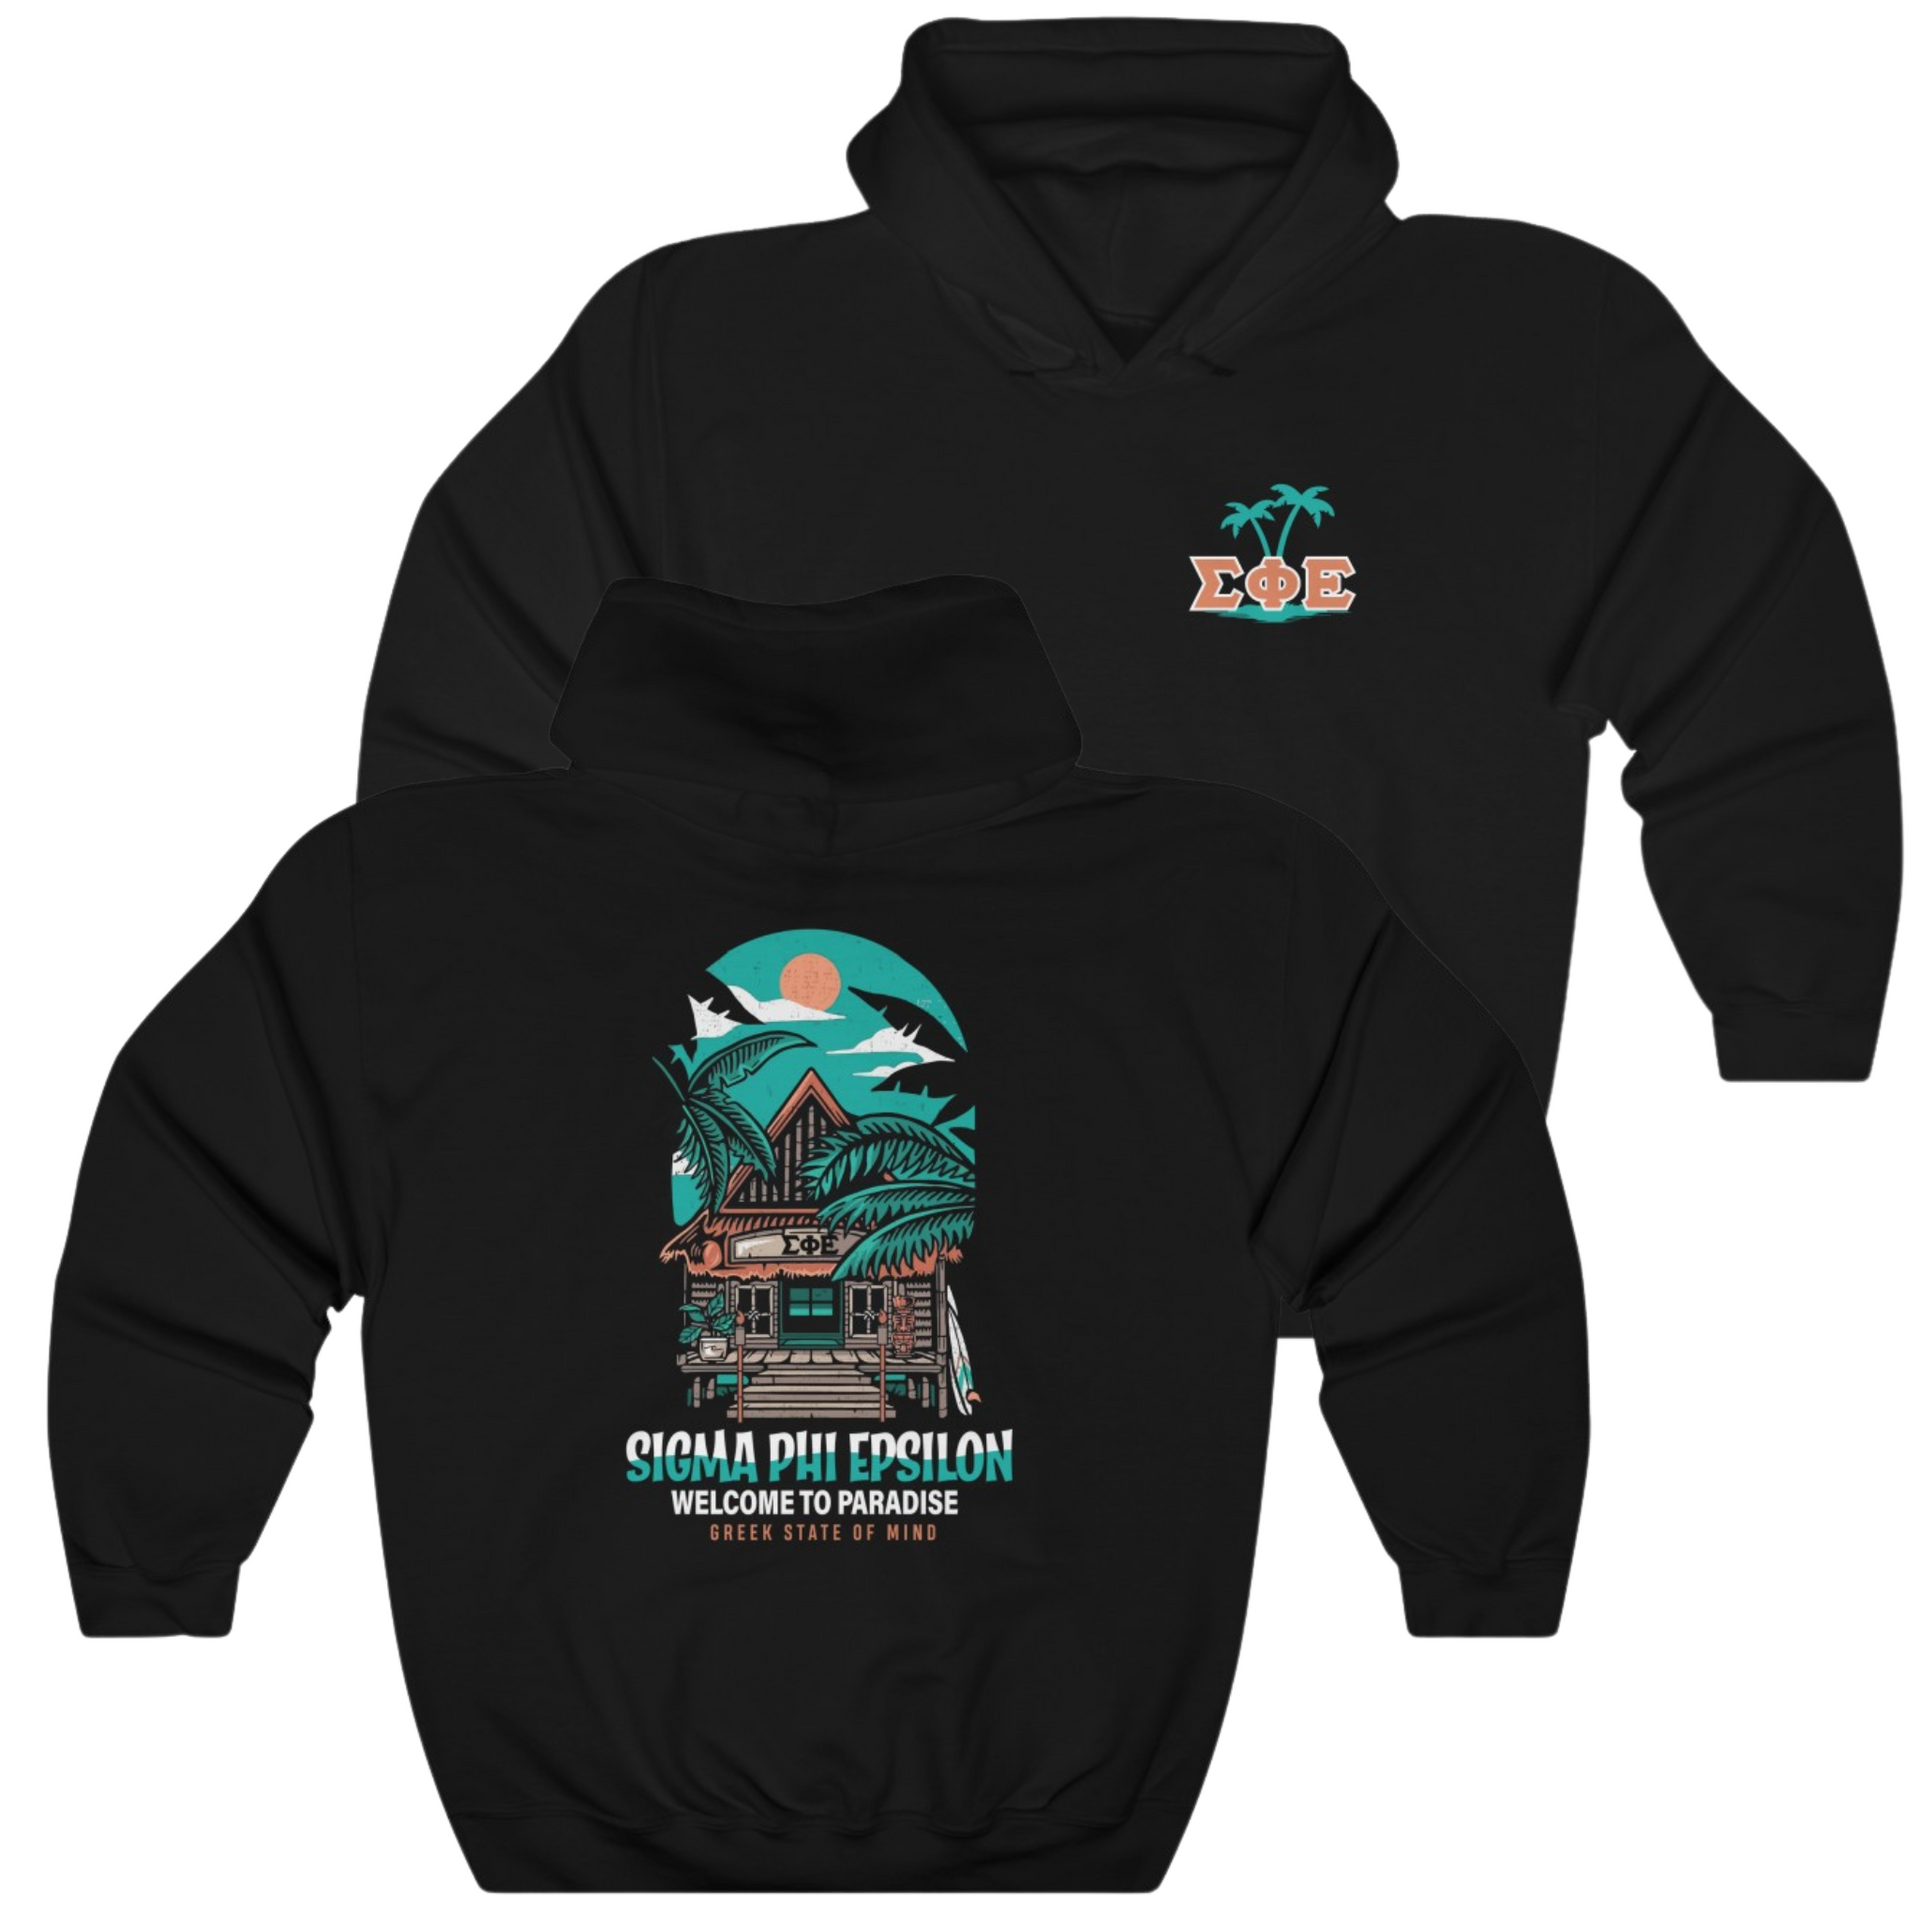 Black Sigma Phi Epsilon Graphic Hoodie | Welcome to Paradise | SigEp Fraternity Clothes and Merchandise 